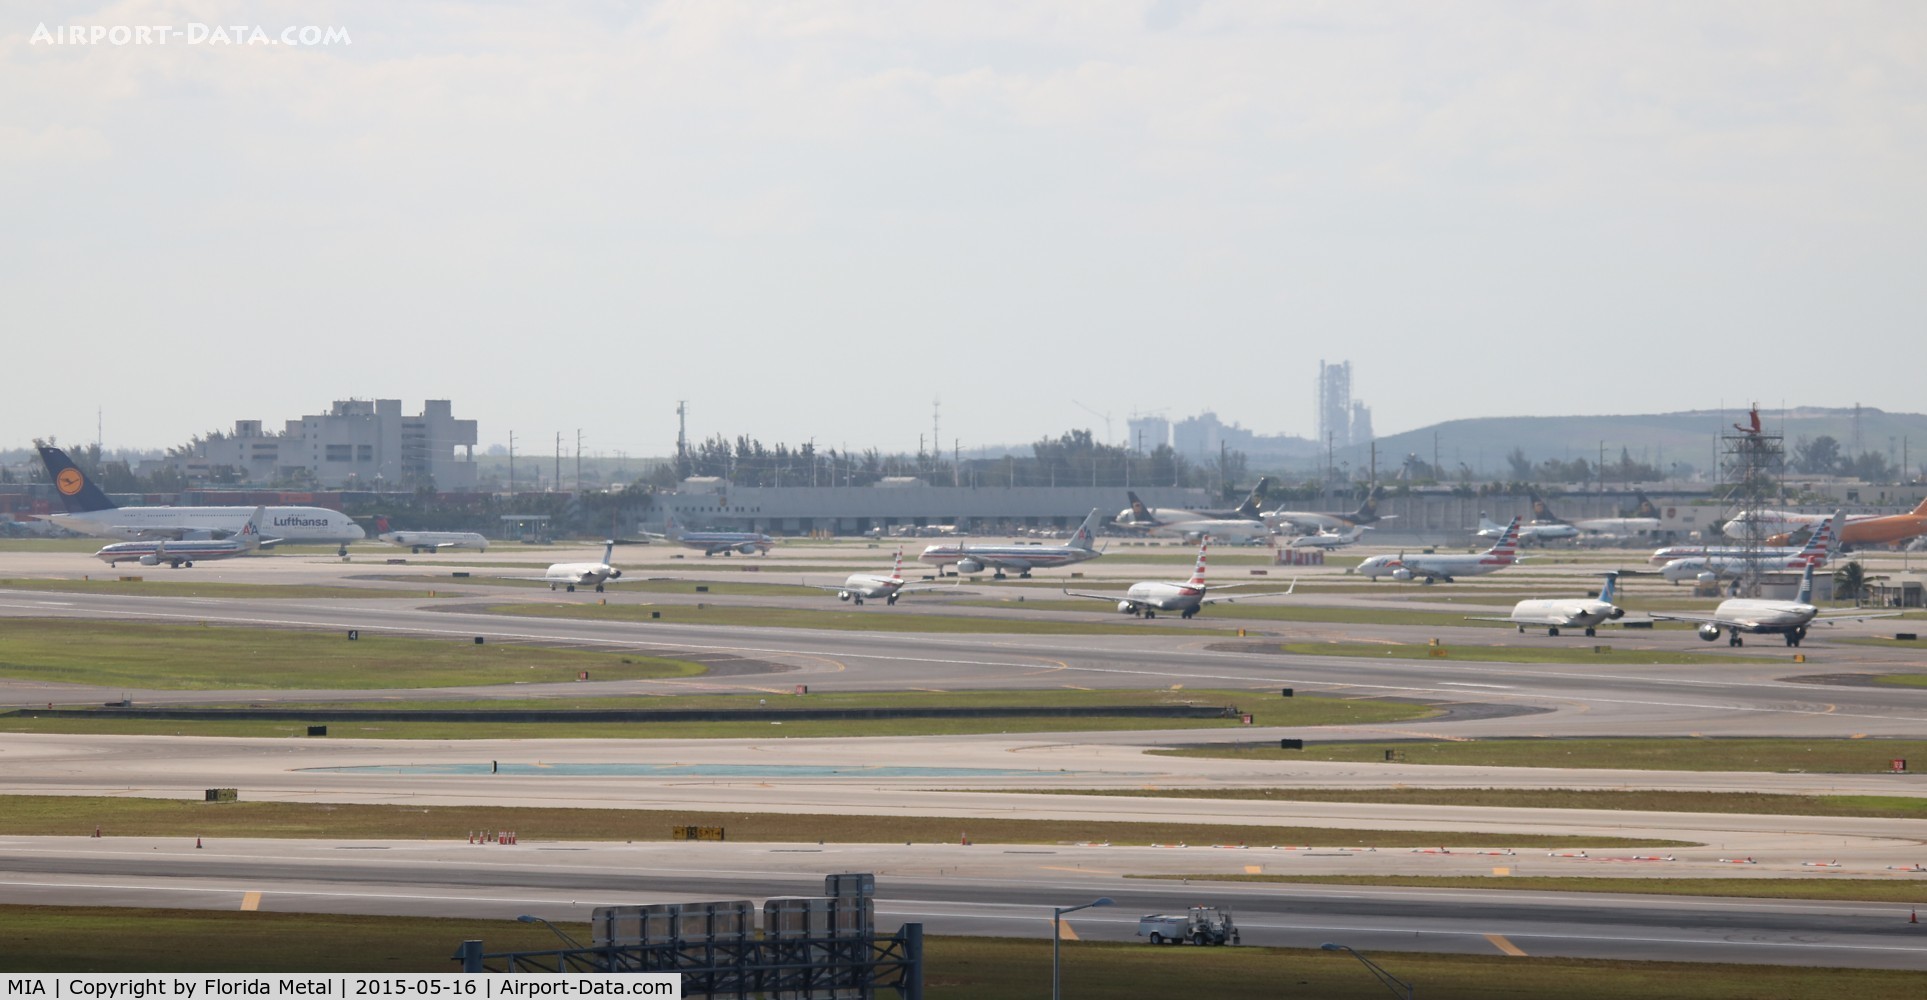 Miami International Airport (MIA) - Runway 9 closed, 8L and 8R being used for the landings while 12 being used for departures